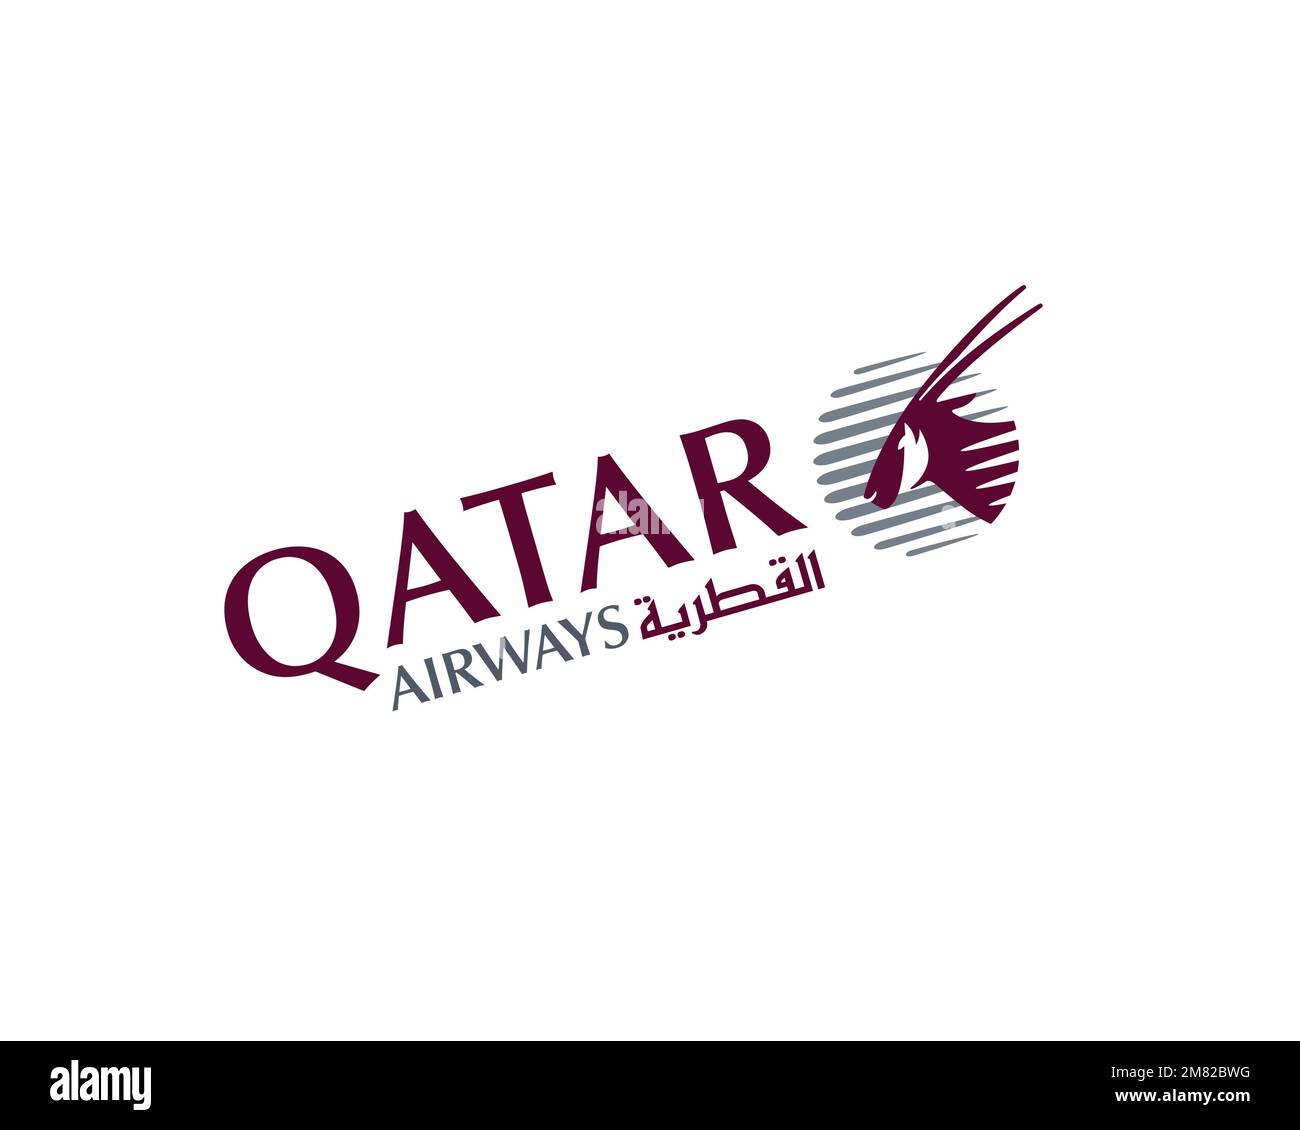 Qatar airways Cut Out Stock Images & Pictures - Alamy